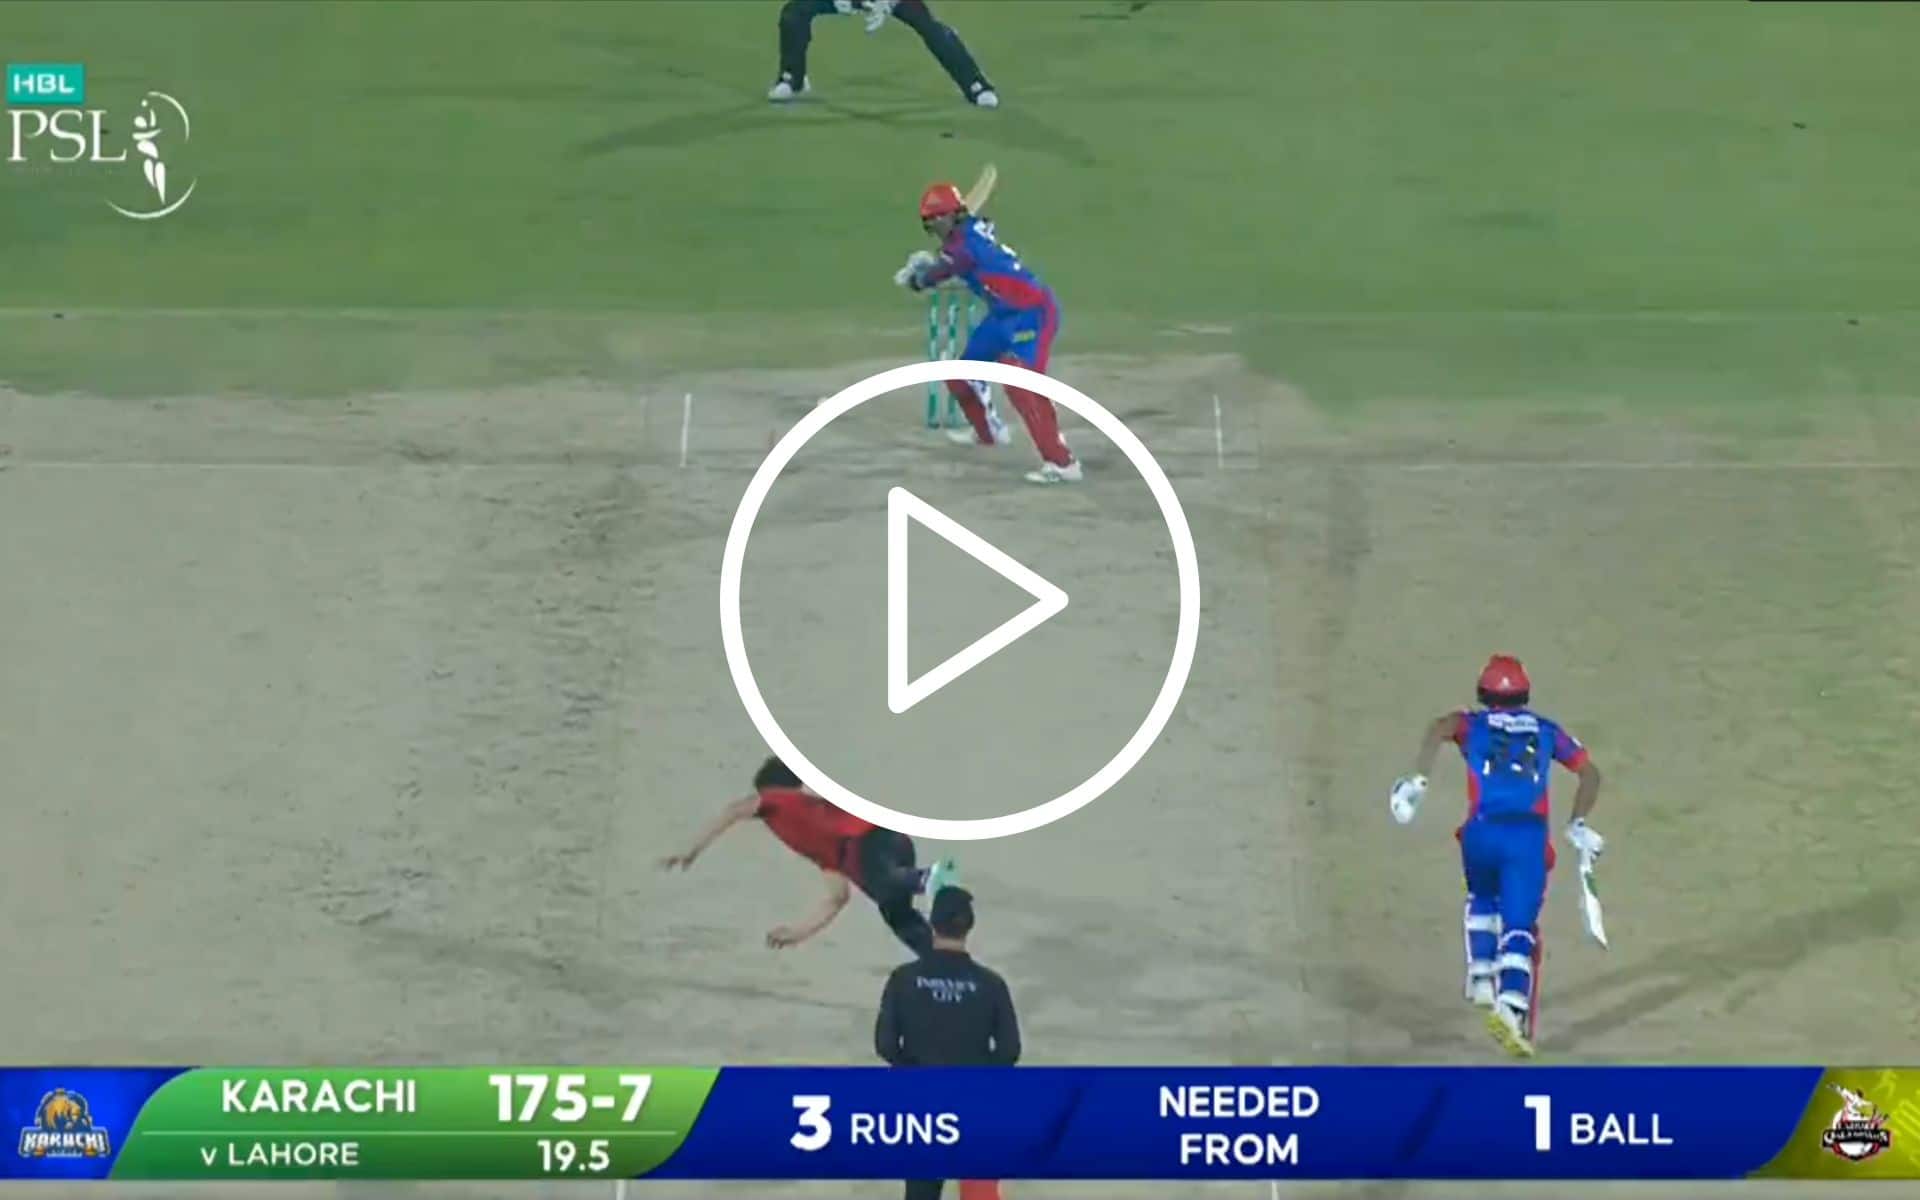 [Watch] Shoaib Malik's Experience Helps Karachi Seal A Last Ball Thriller In Must-Win Game